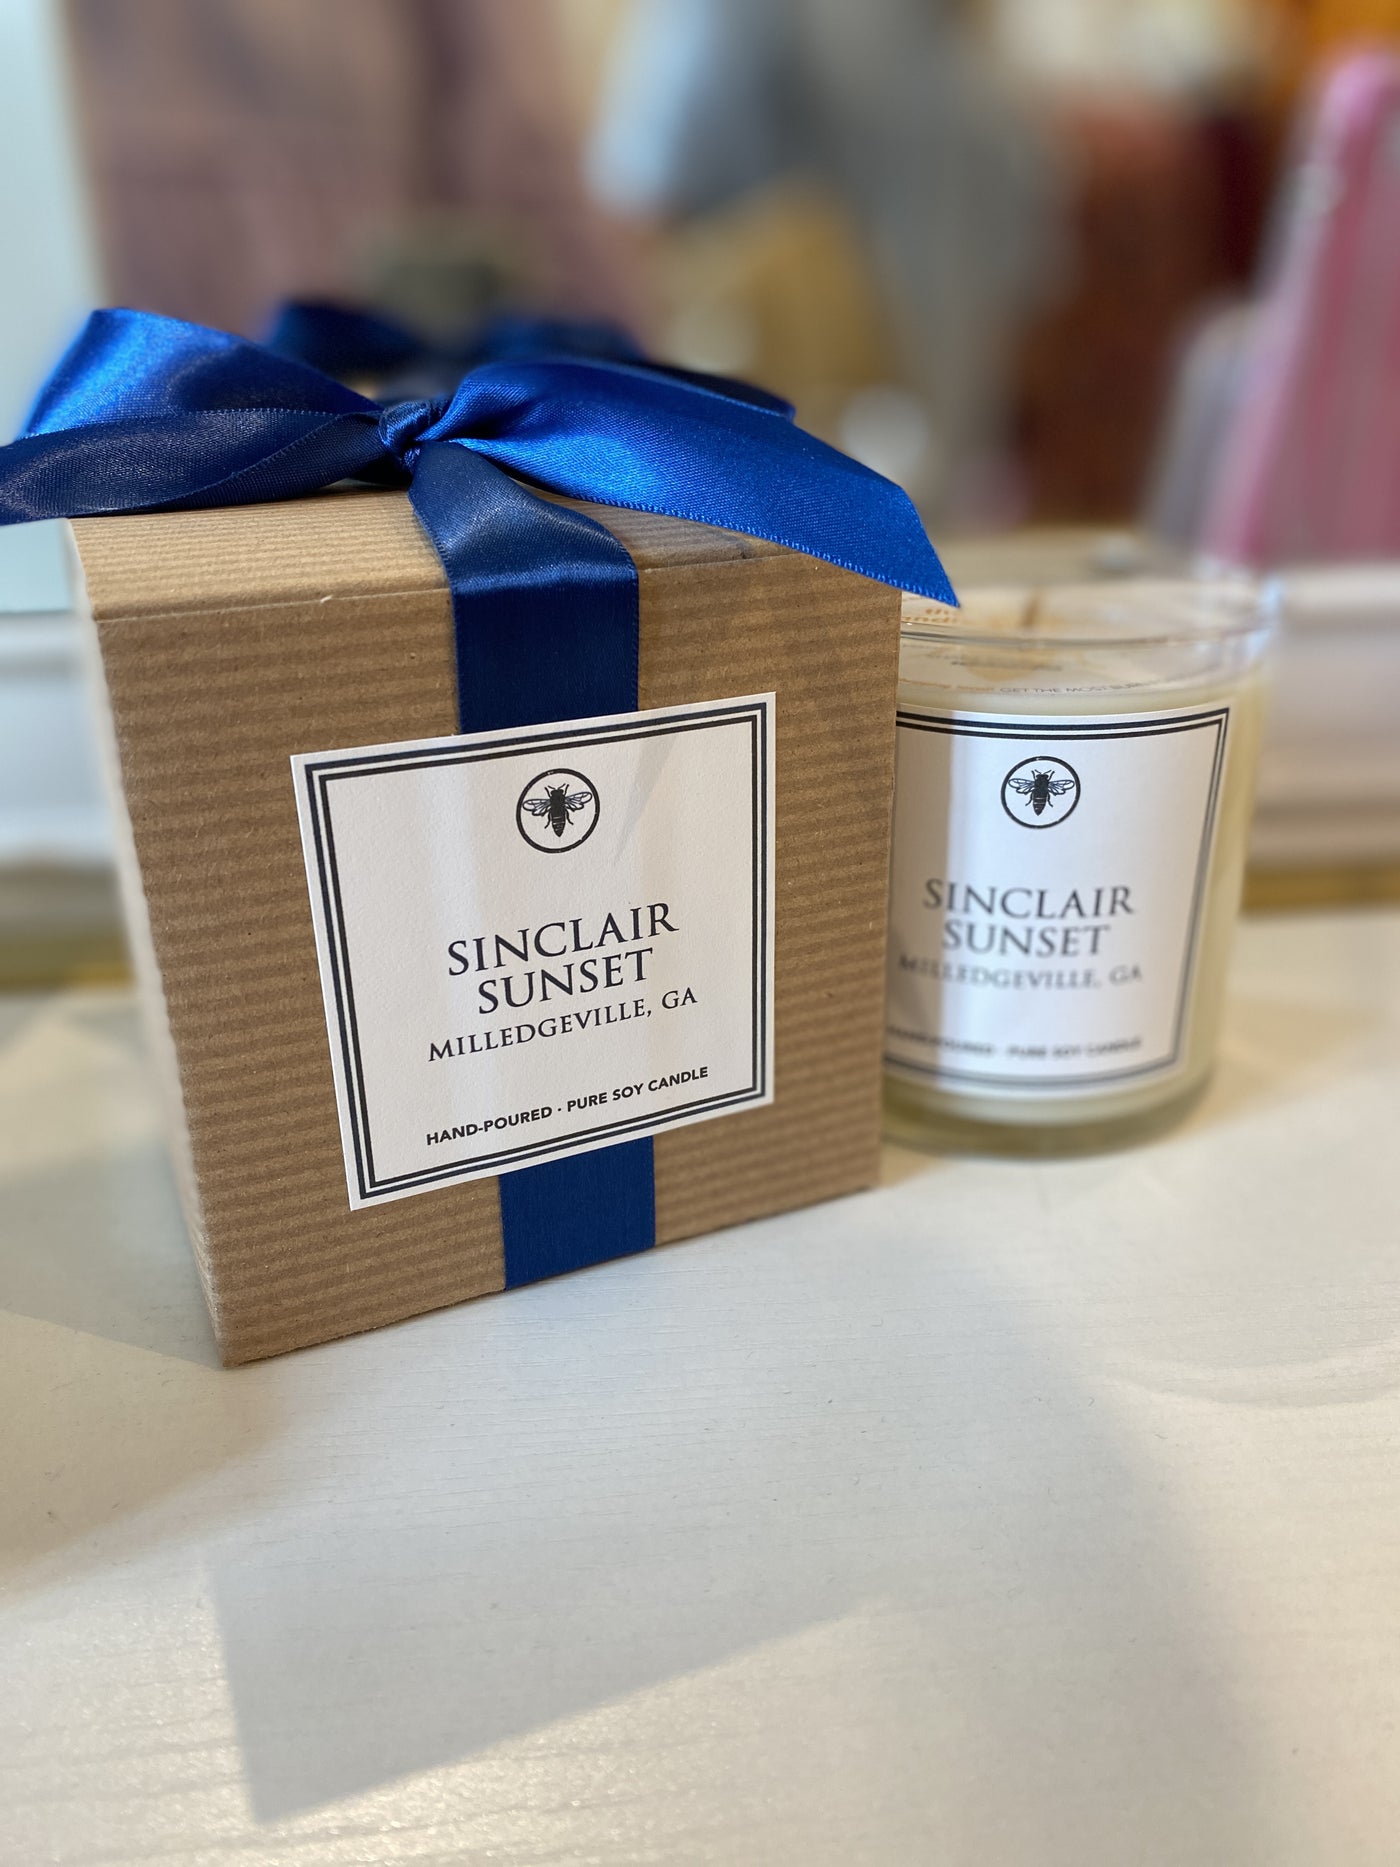 Sinclair Sunset Candle